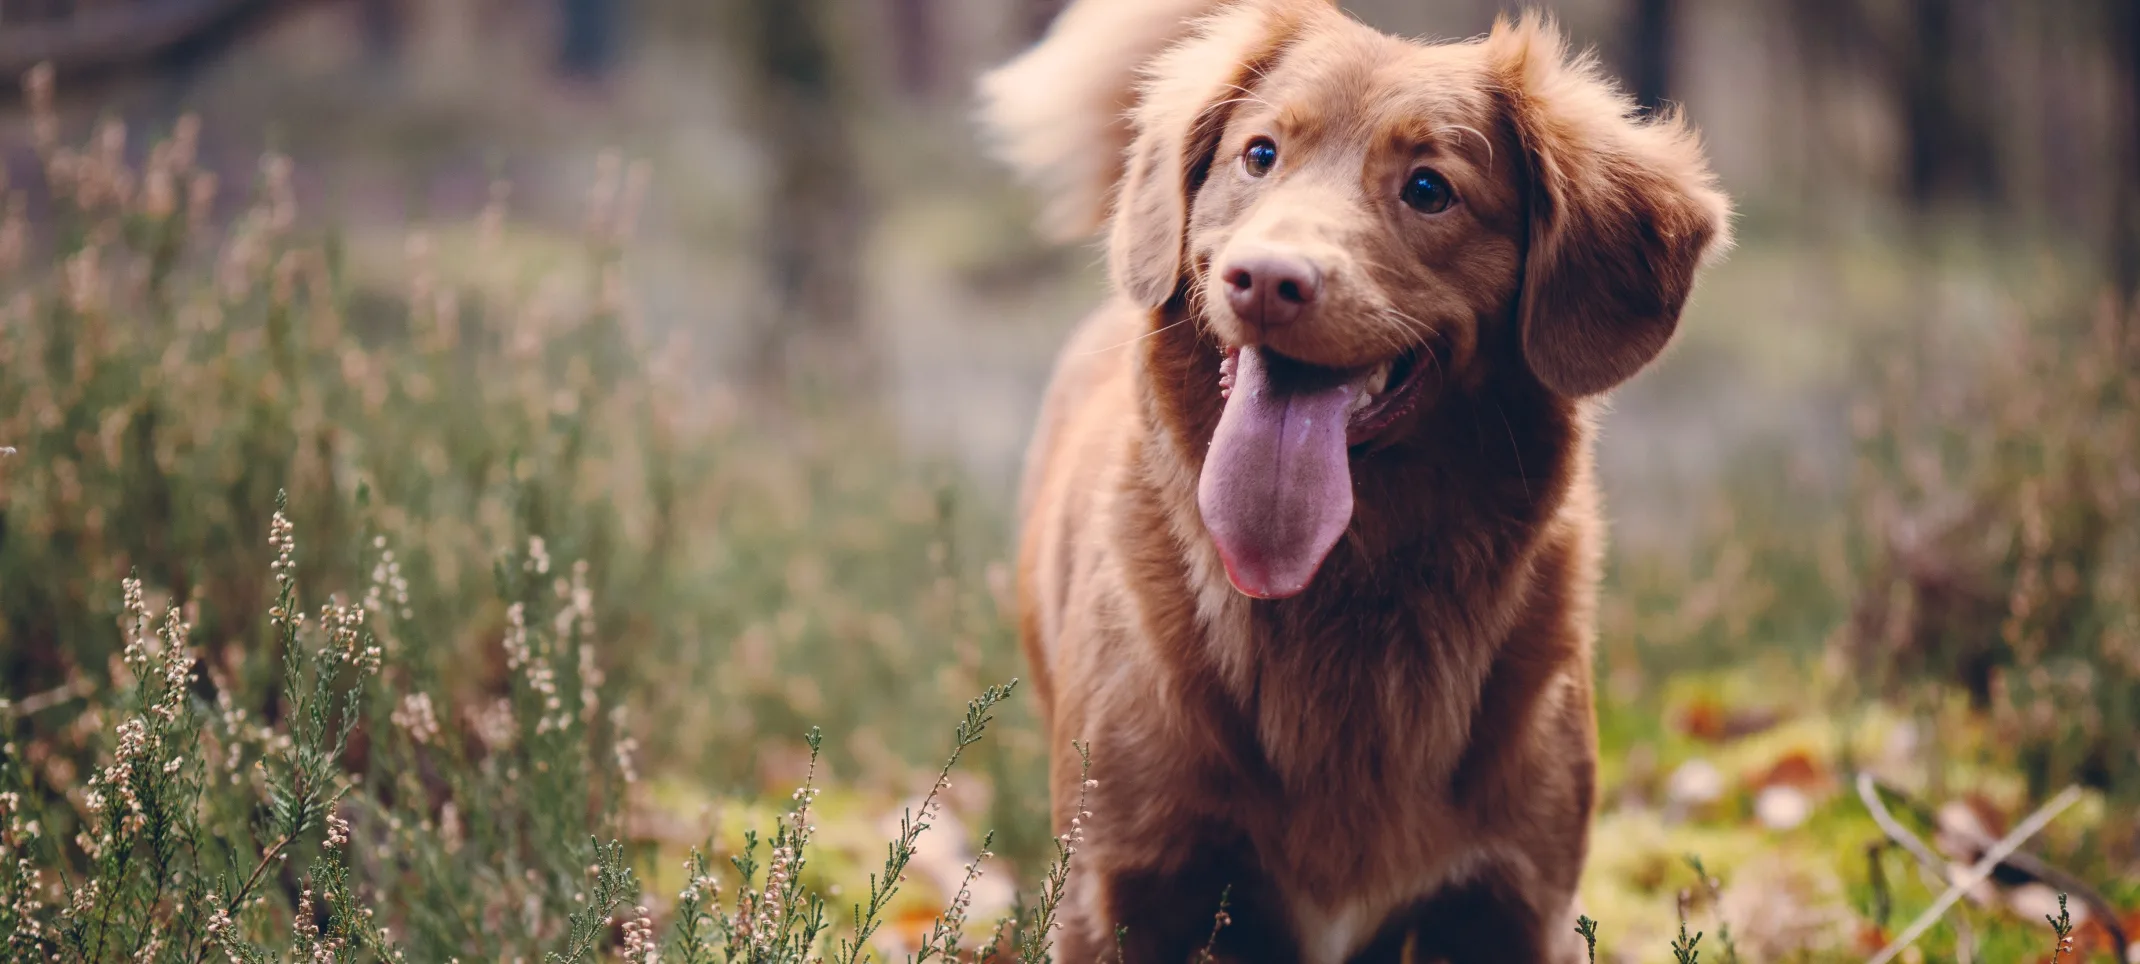 Dog standing in grassy area with tongue out